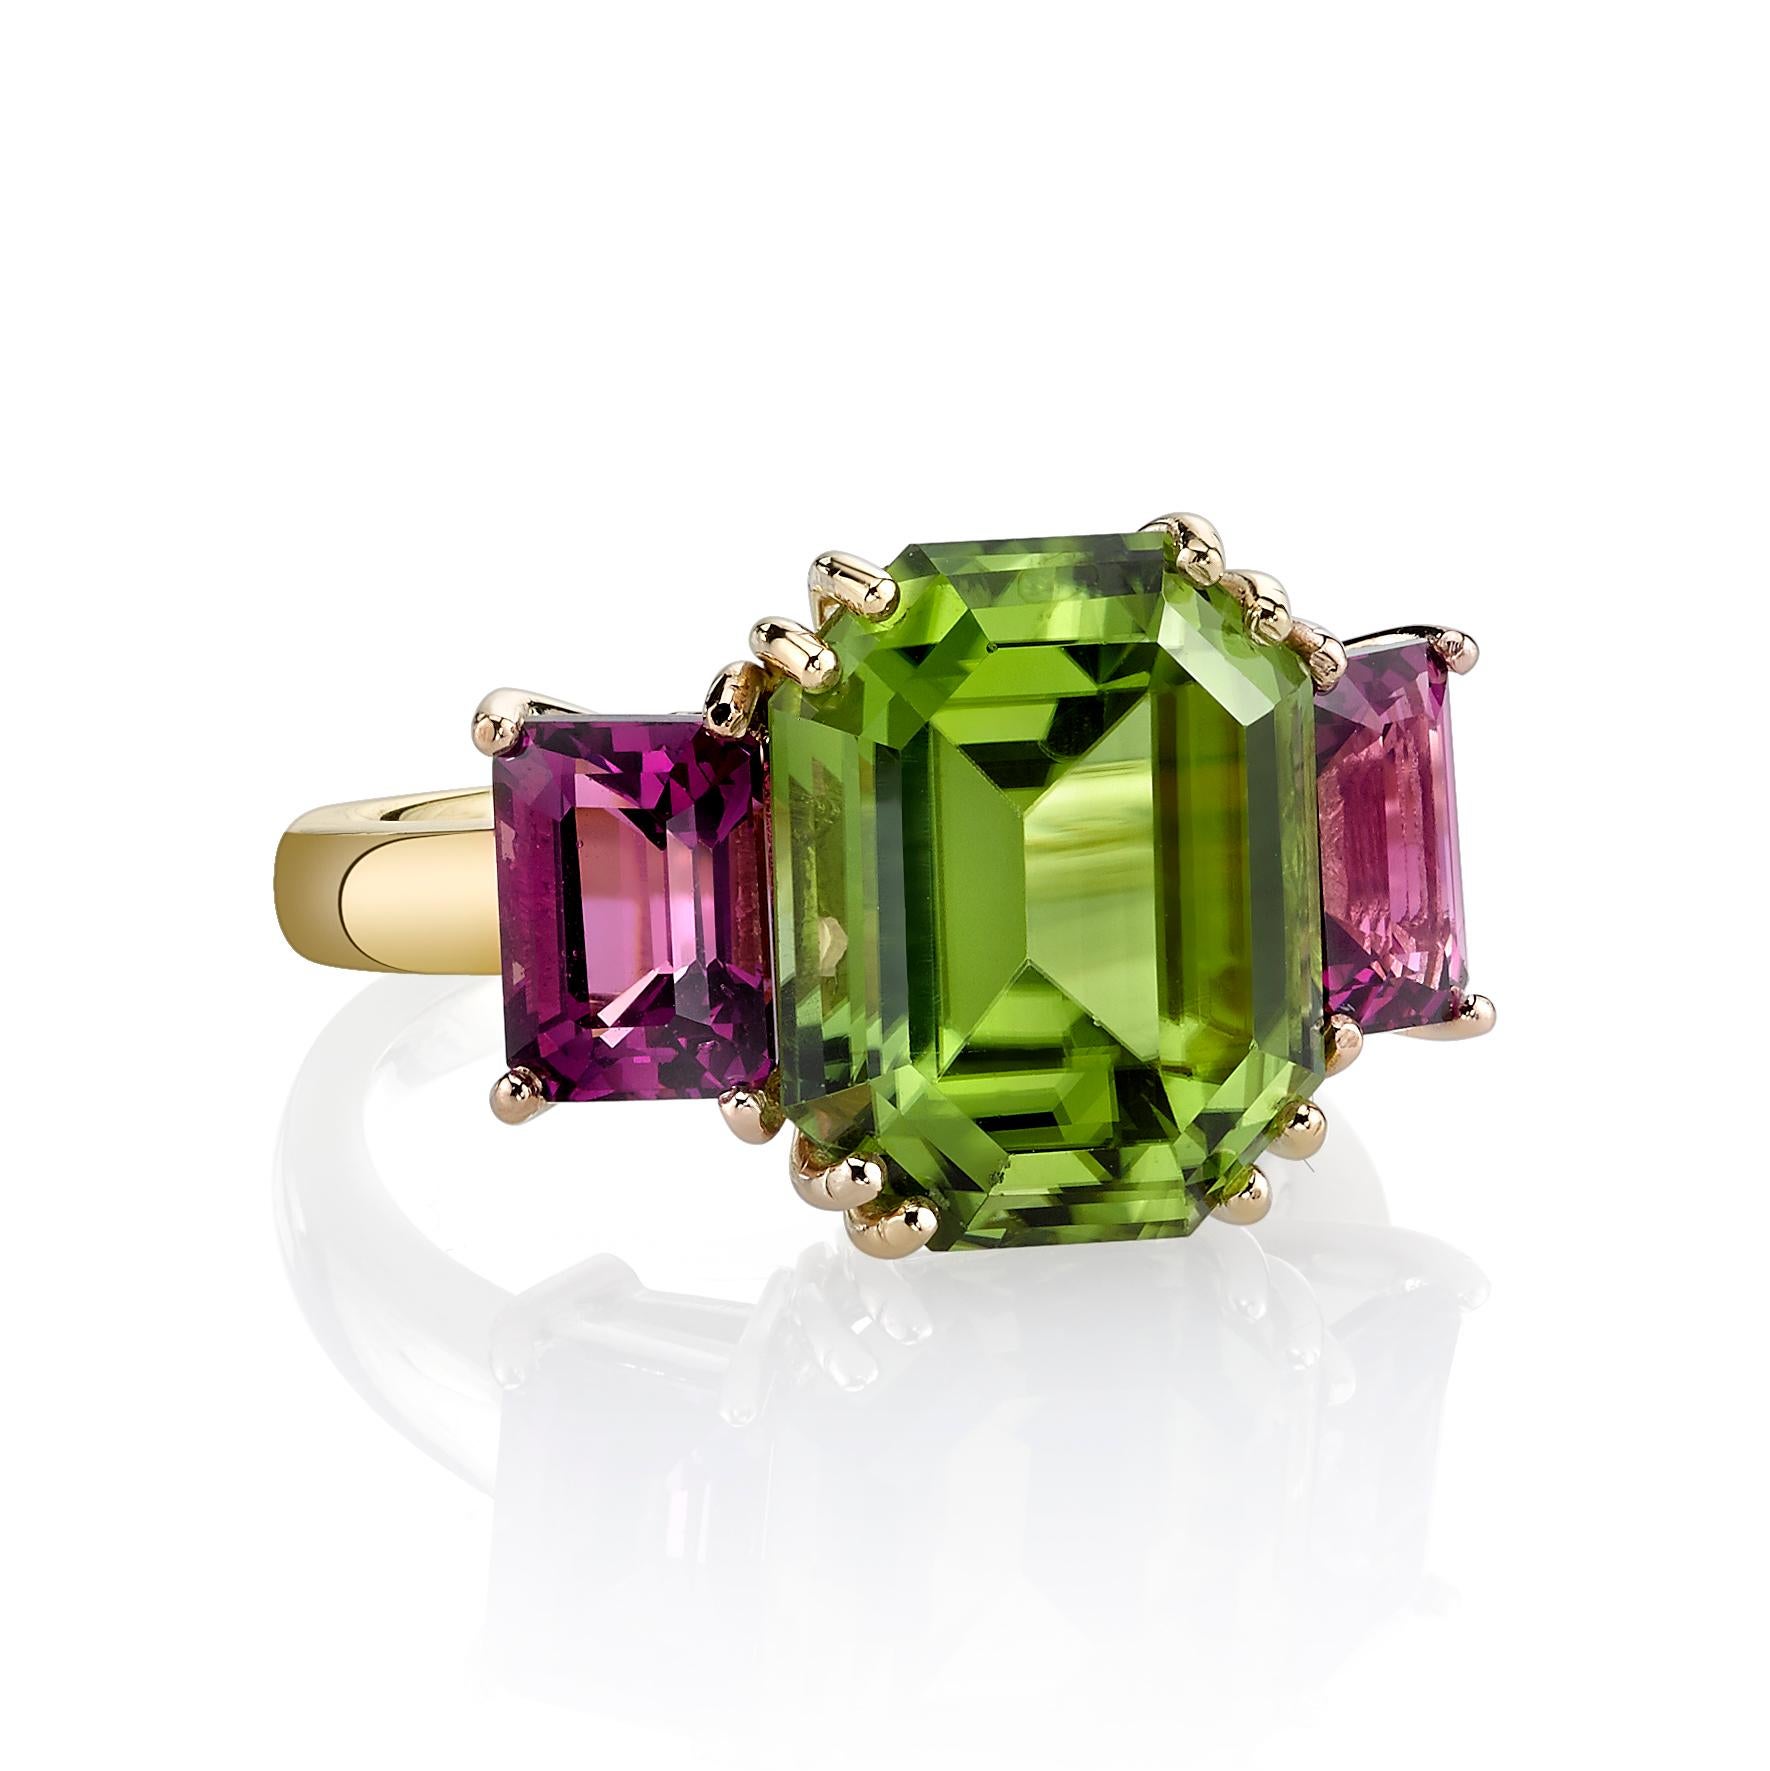 Women's 6.77 Carat Peridot and Rhodolite Garnet Cocktail Ring in Yellow and Rose Gold   For Sale